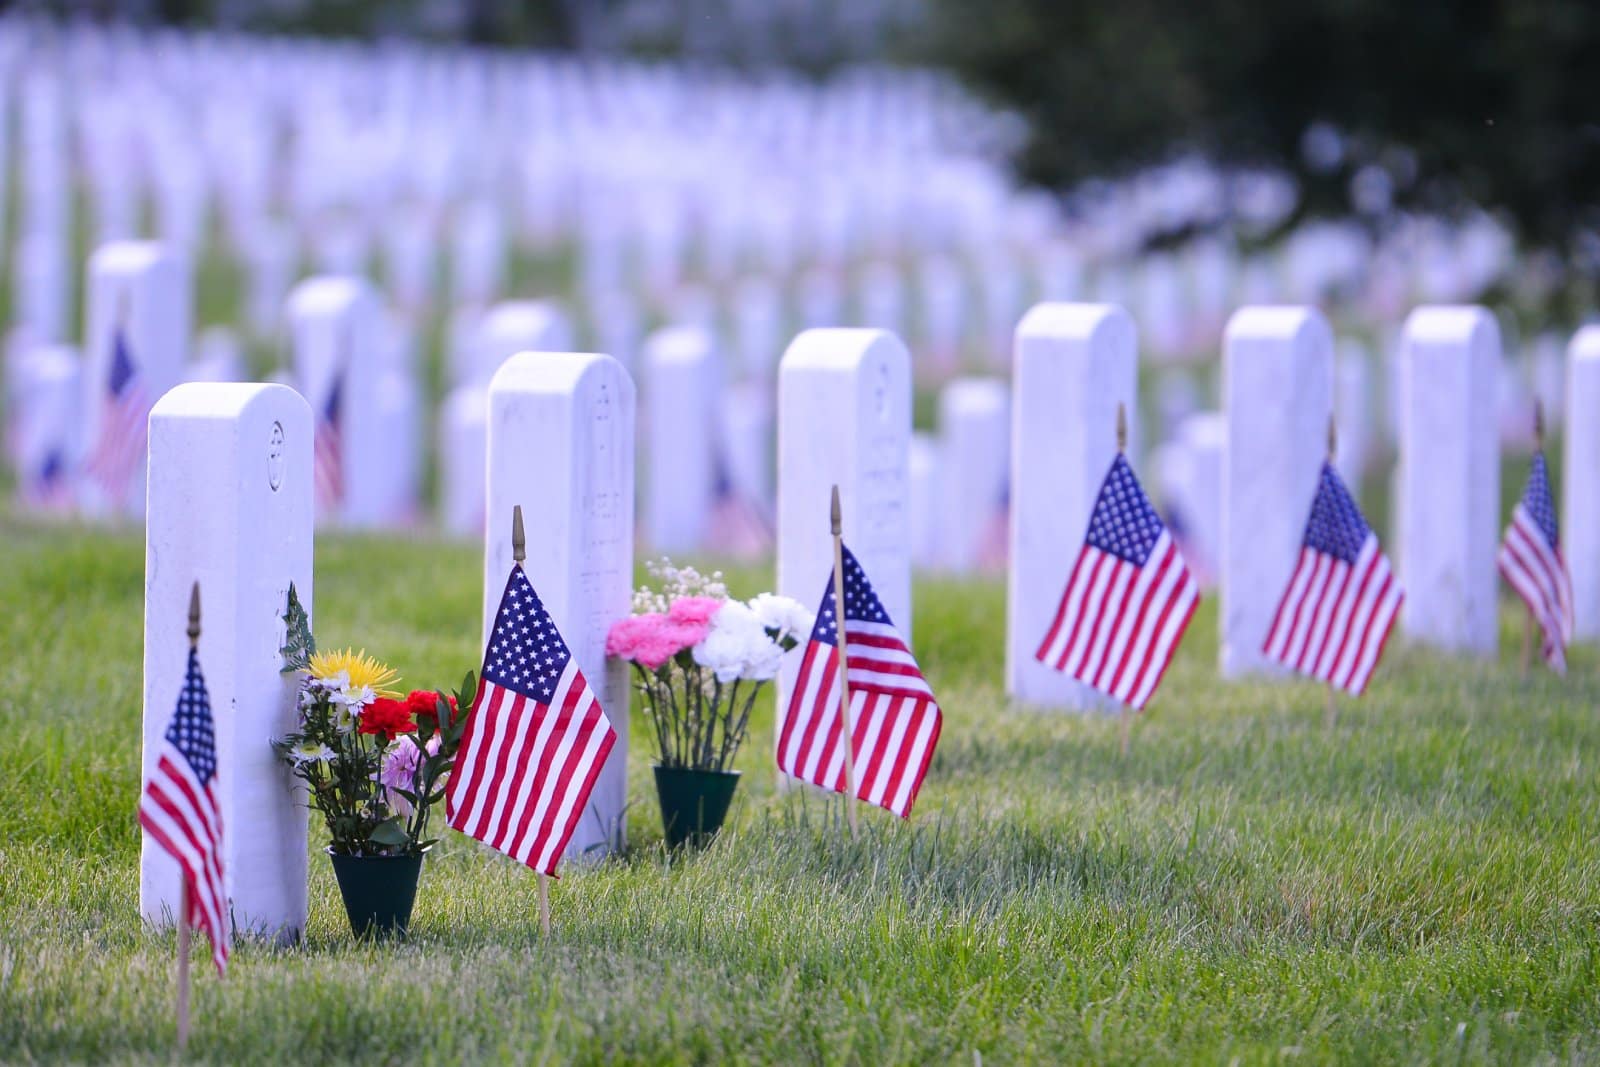 <p class="wp-caption-text">Image Credit: Shutterstock / Orhan Cam</p>  <p>Established during the Civil War on the grounds of Robert E. Lee’s home, Arlington houses the graves of American veterans from all the nation’s wars.</p>